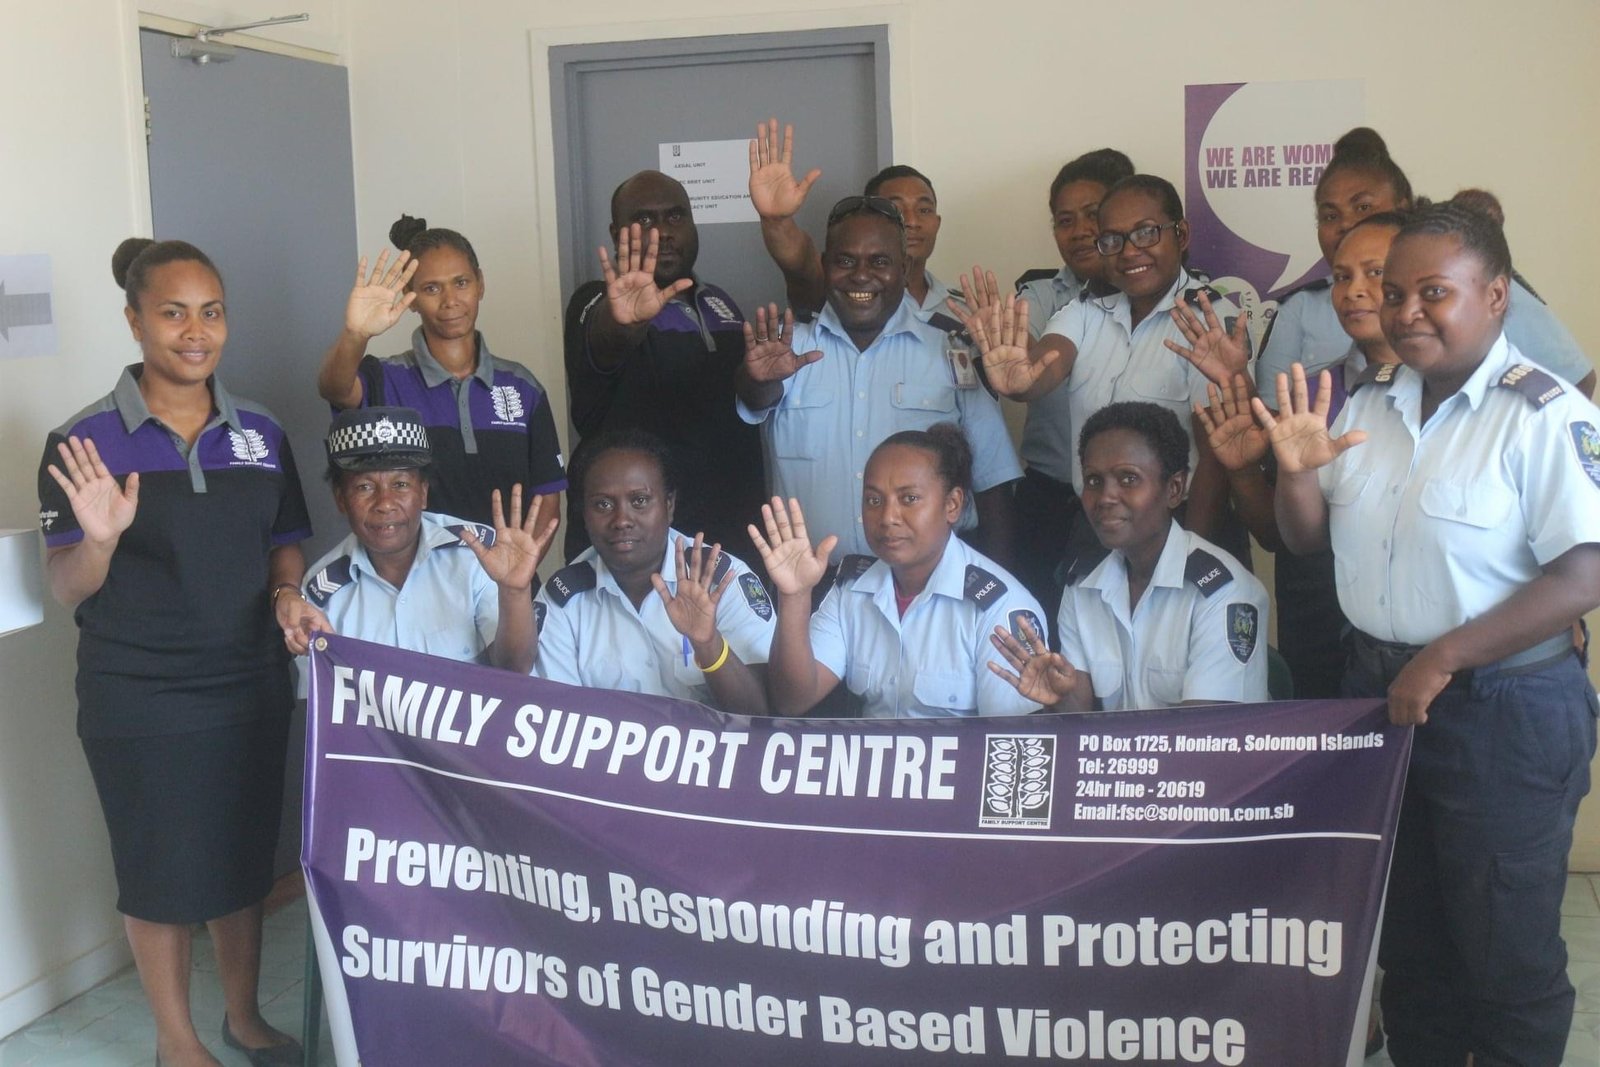 Family Support Centre